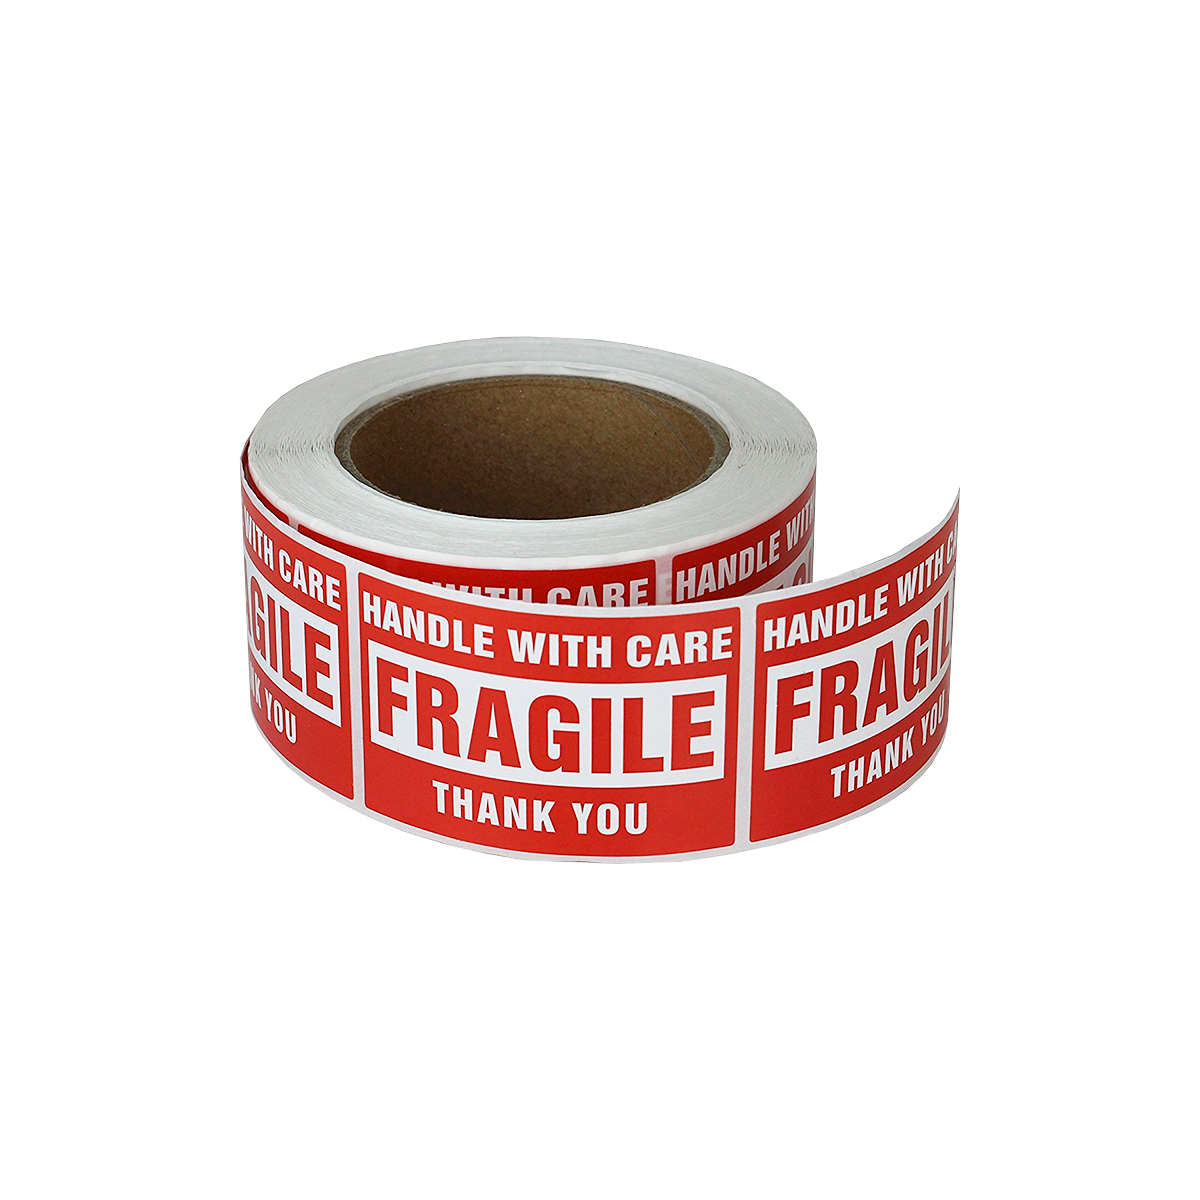 50 Fragile Labels FRAGILE HANDLE WITH CARE WARNING STICKER 1" x 3" 